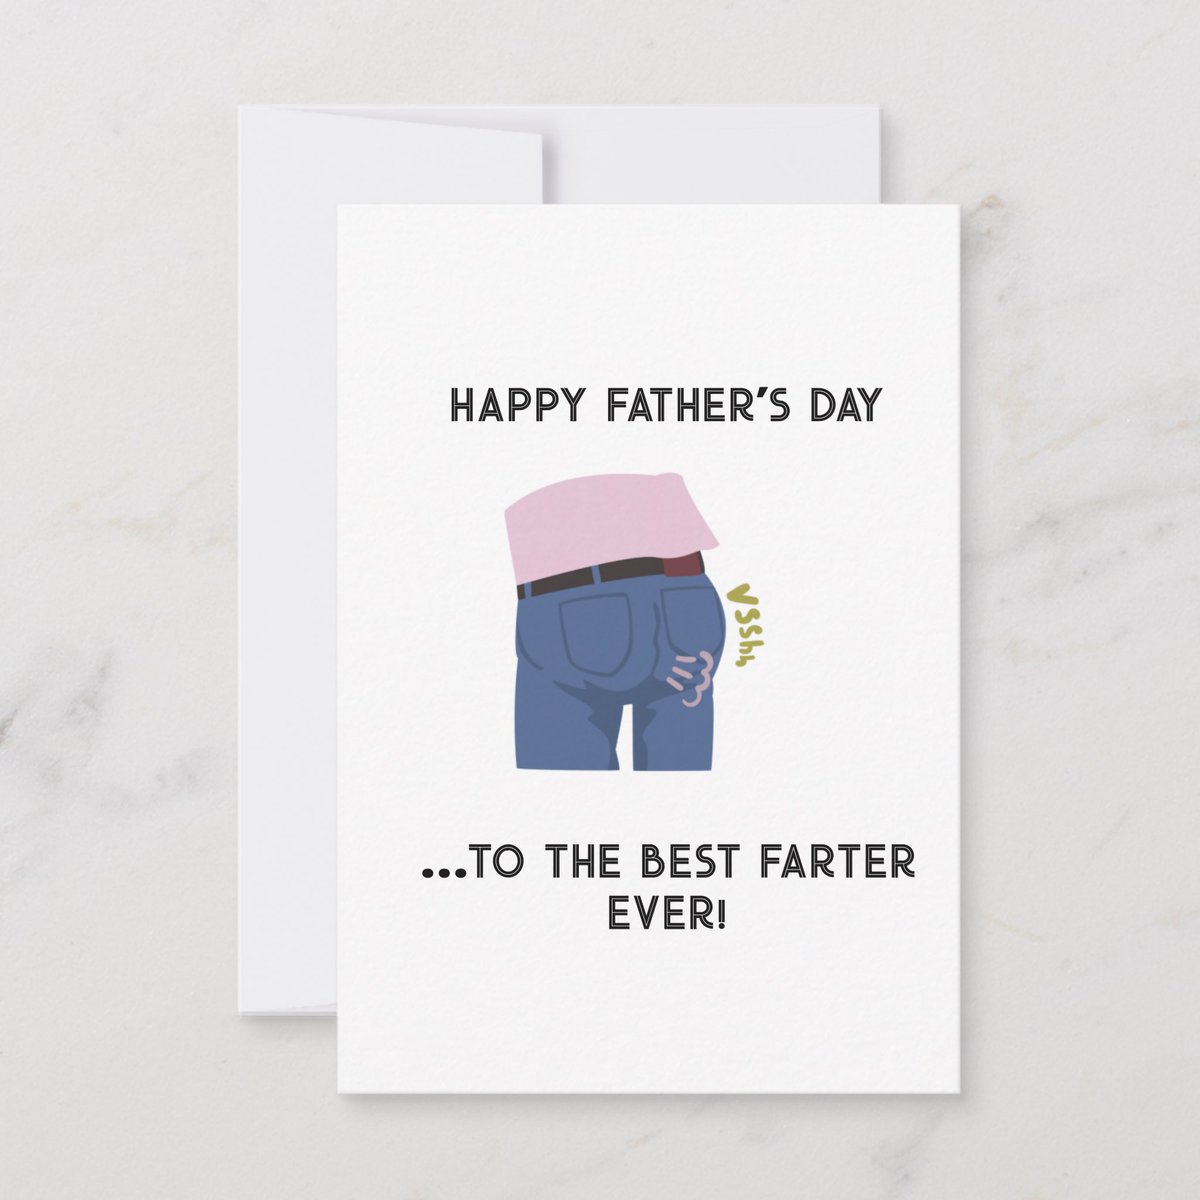 Your Father Will Be Blown Away With This Funny Father’s Day Card! So why not show how much you care for your flatulent father with this touching card? Available @www.zazzle.co.uk/z/a5r6hh8p#FathersDay #FathersDayCard #FathersDayfunny  #funnydad #funnyfather #funnyfathersdaycards